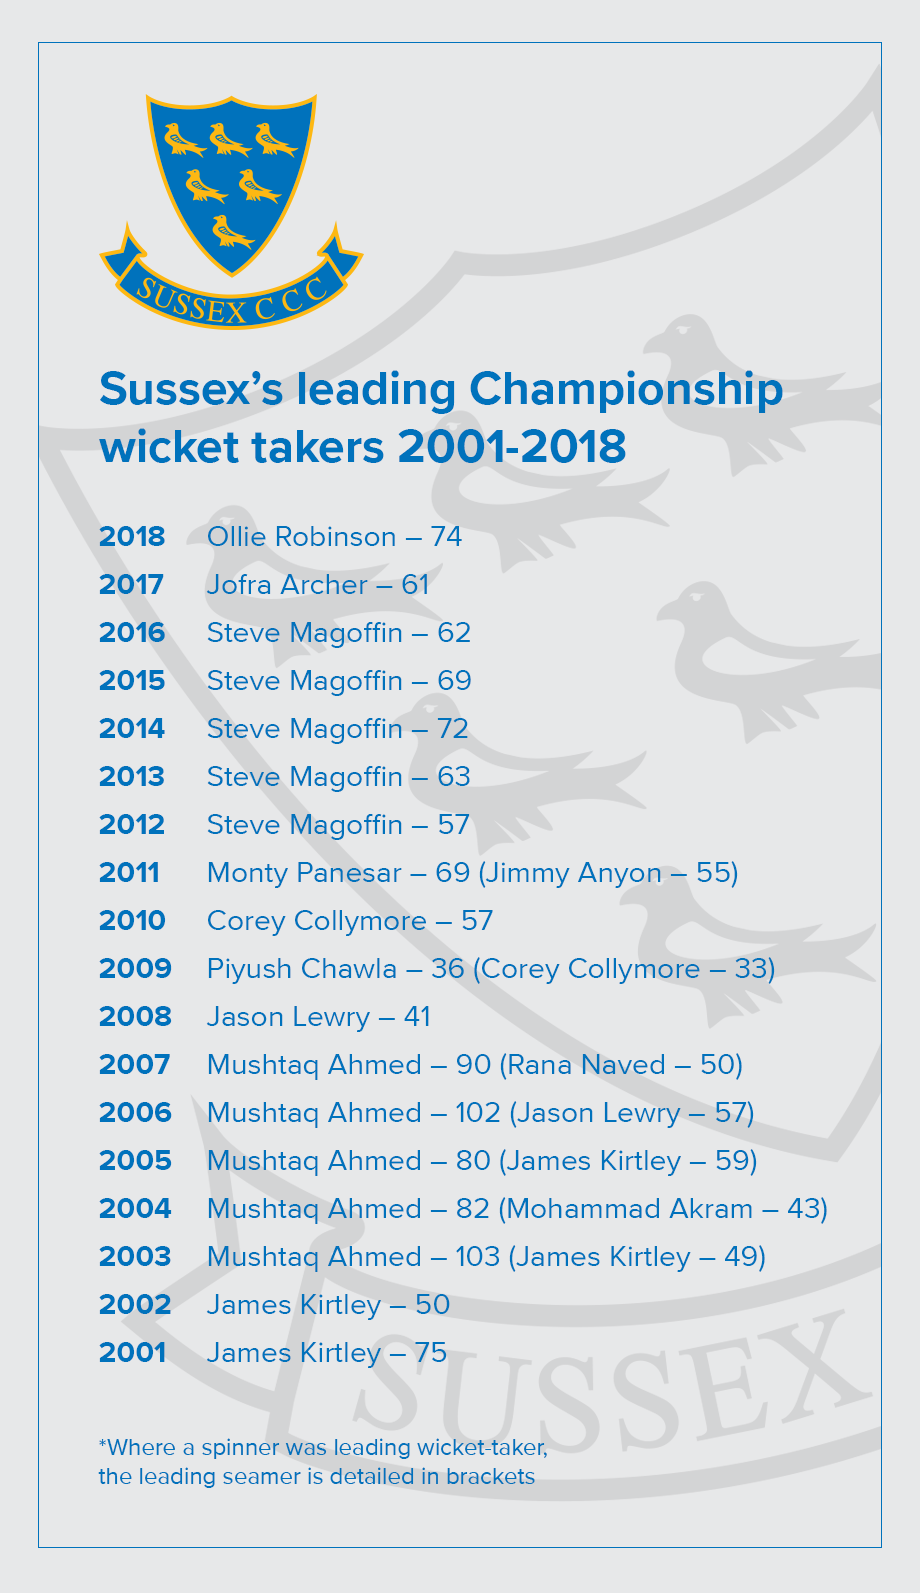 Sussex's leading wicket takers 2001-2018